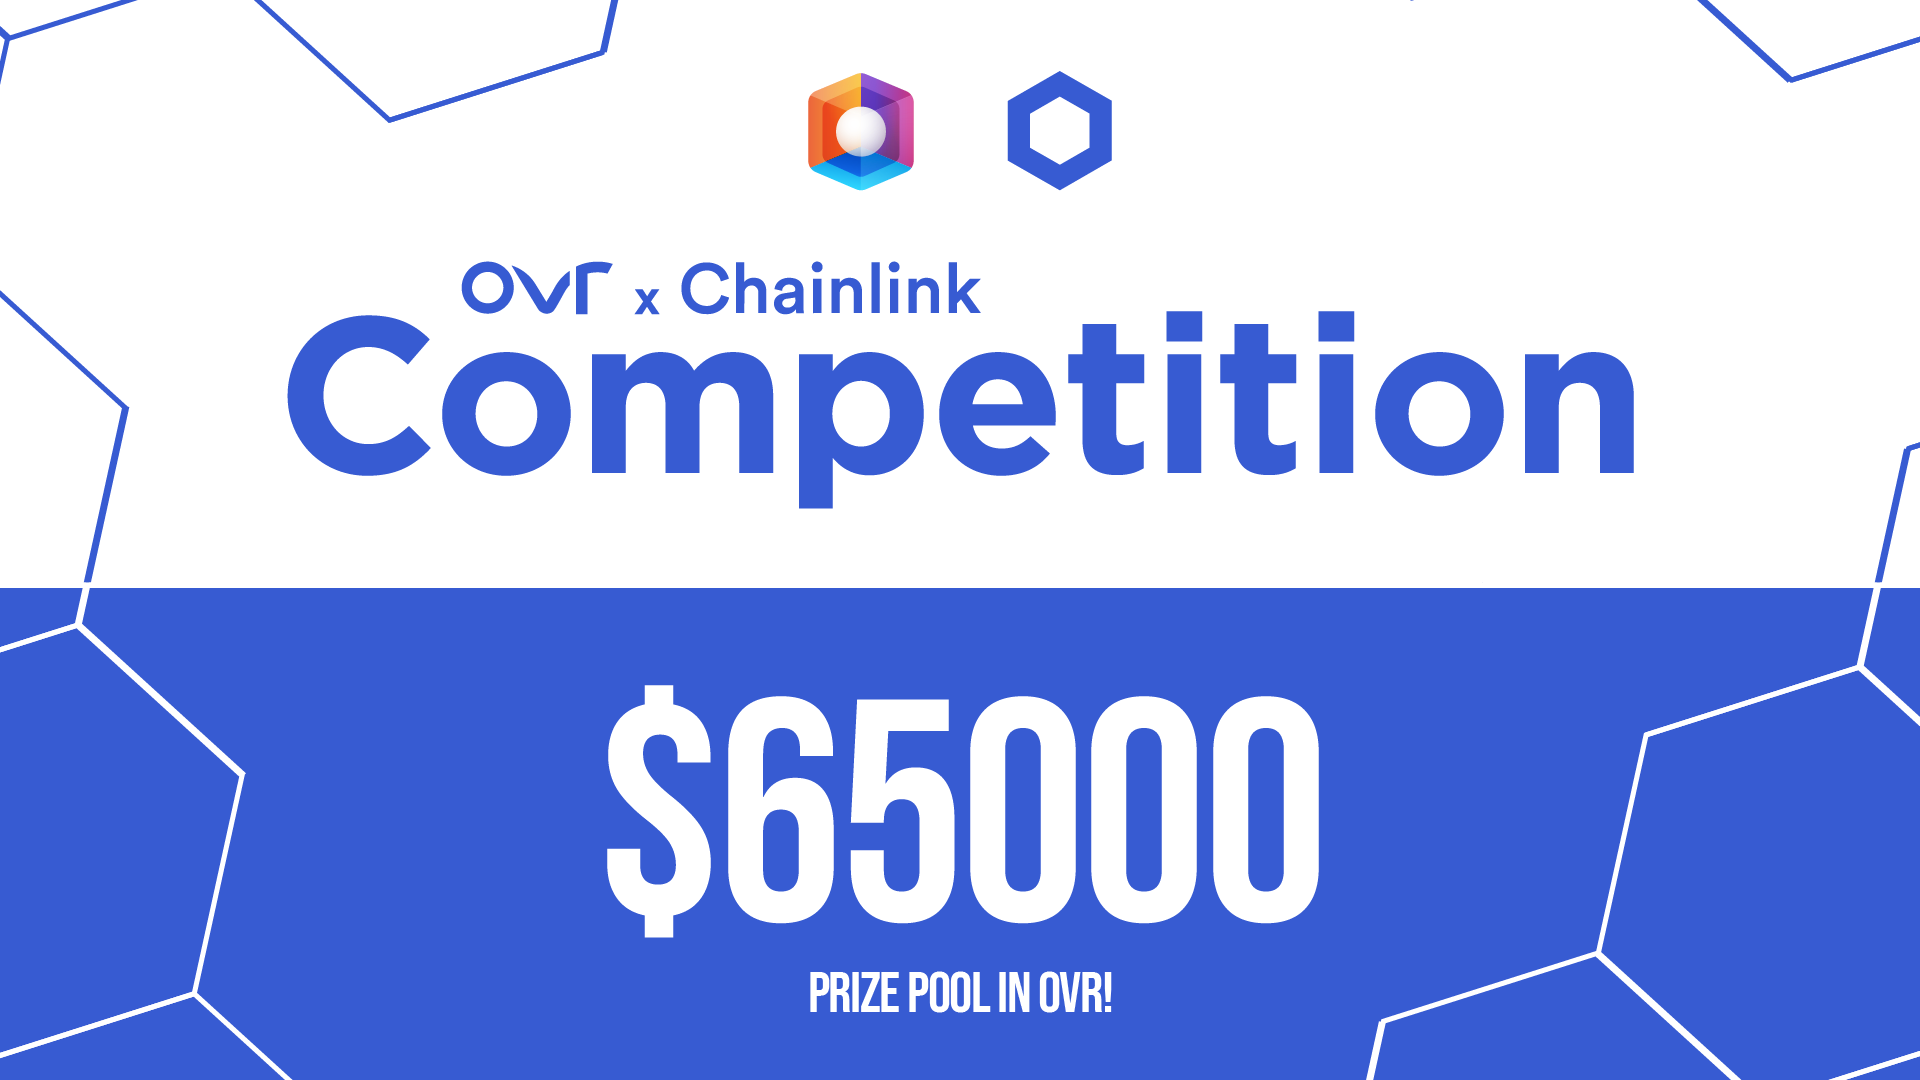 OVR Competition Powered By Chainlink